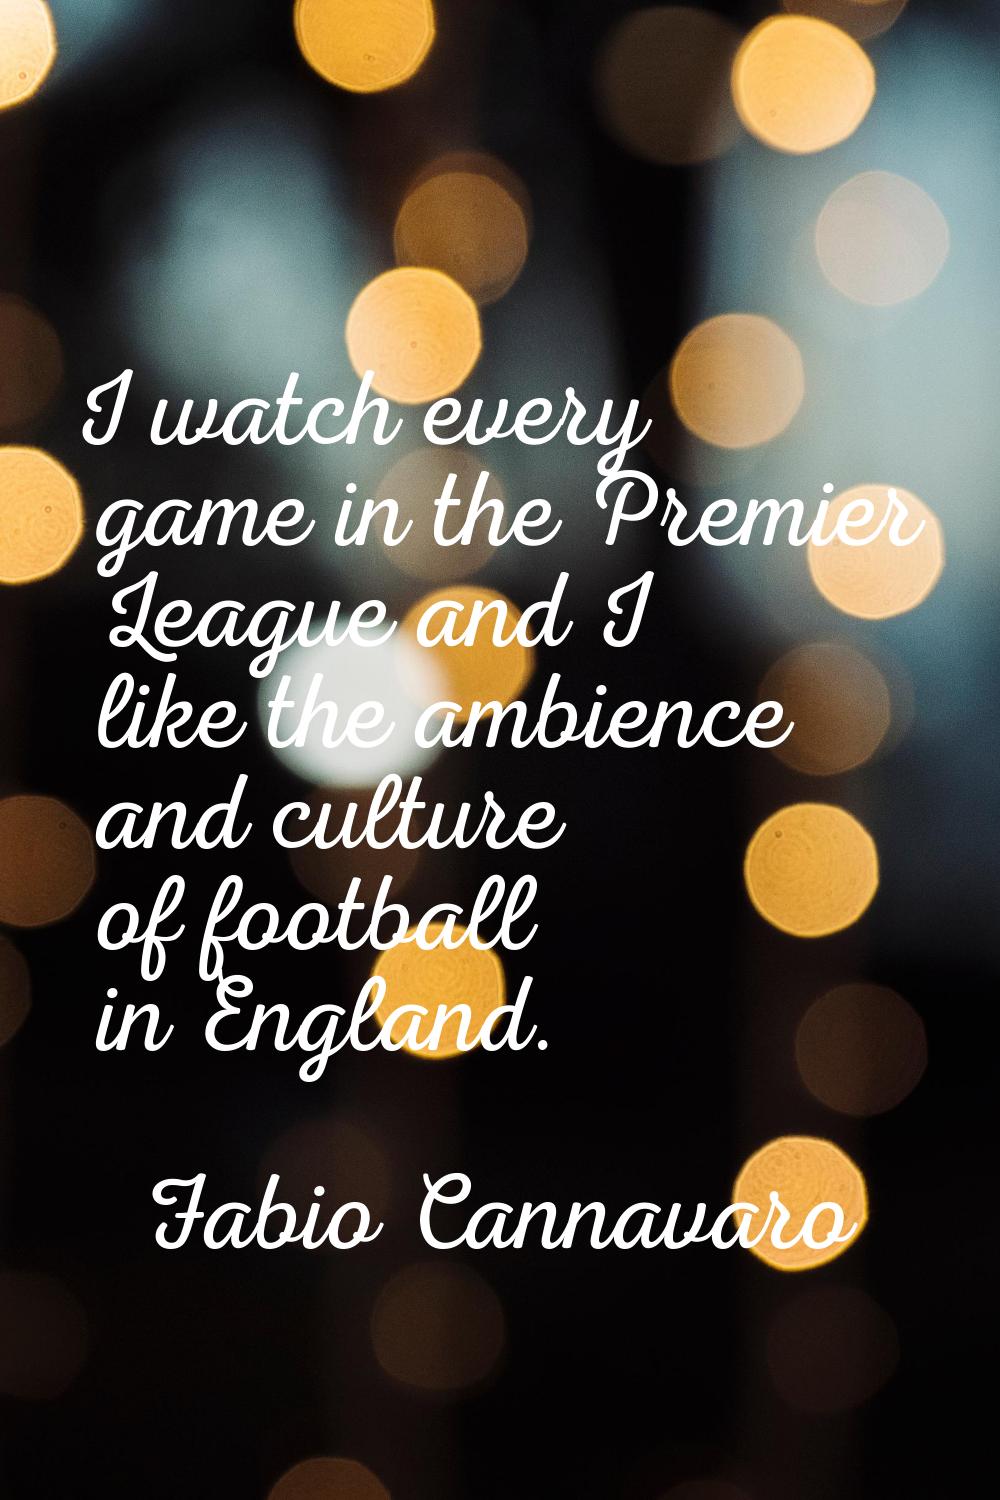 I watch every game in the Premier League and I like the ambience and culture of football in England